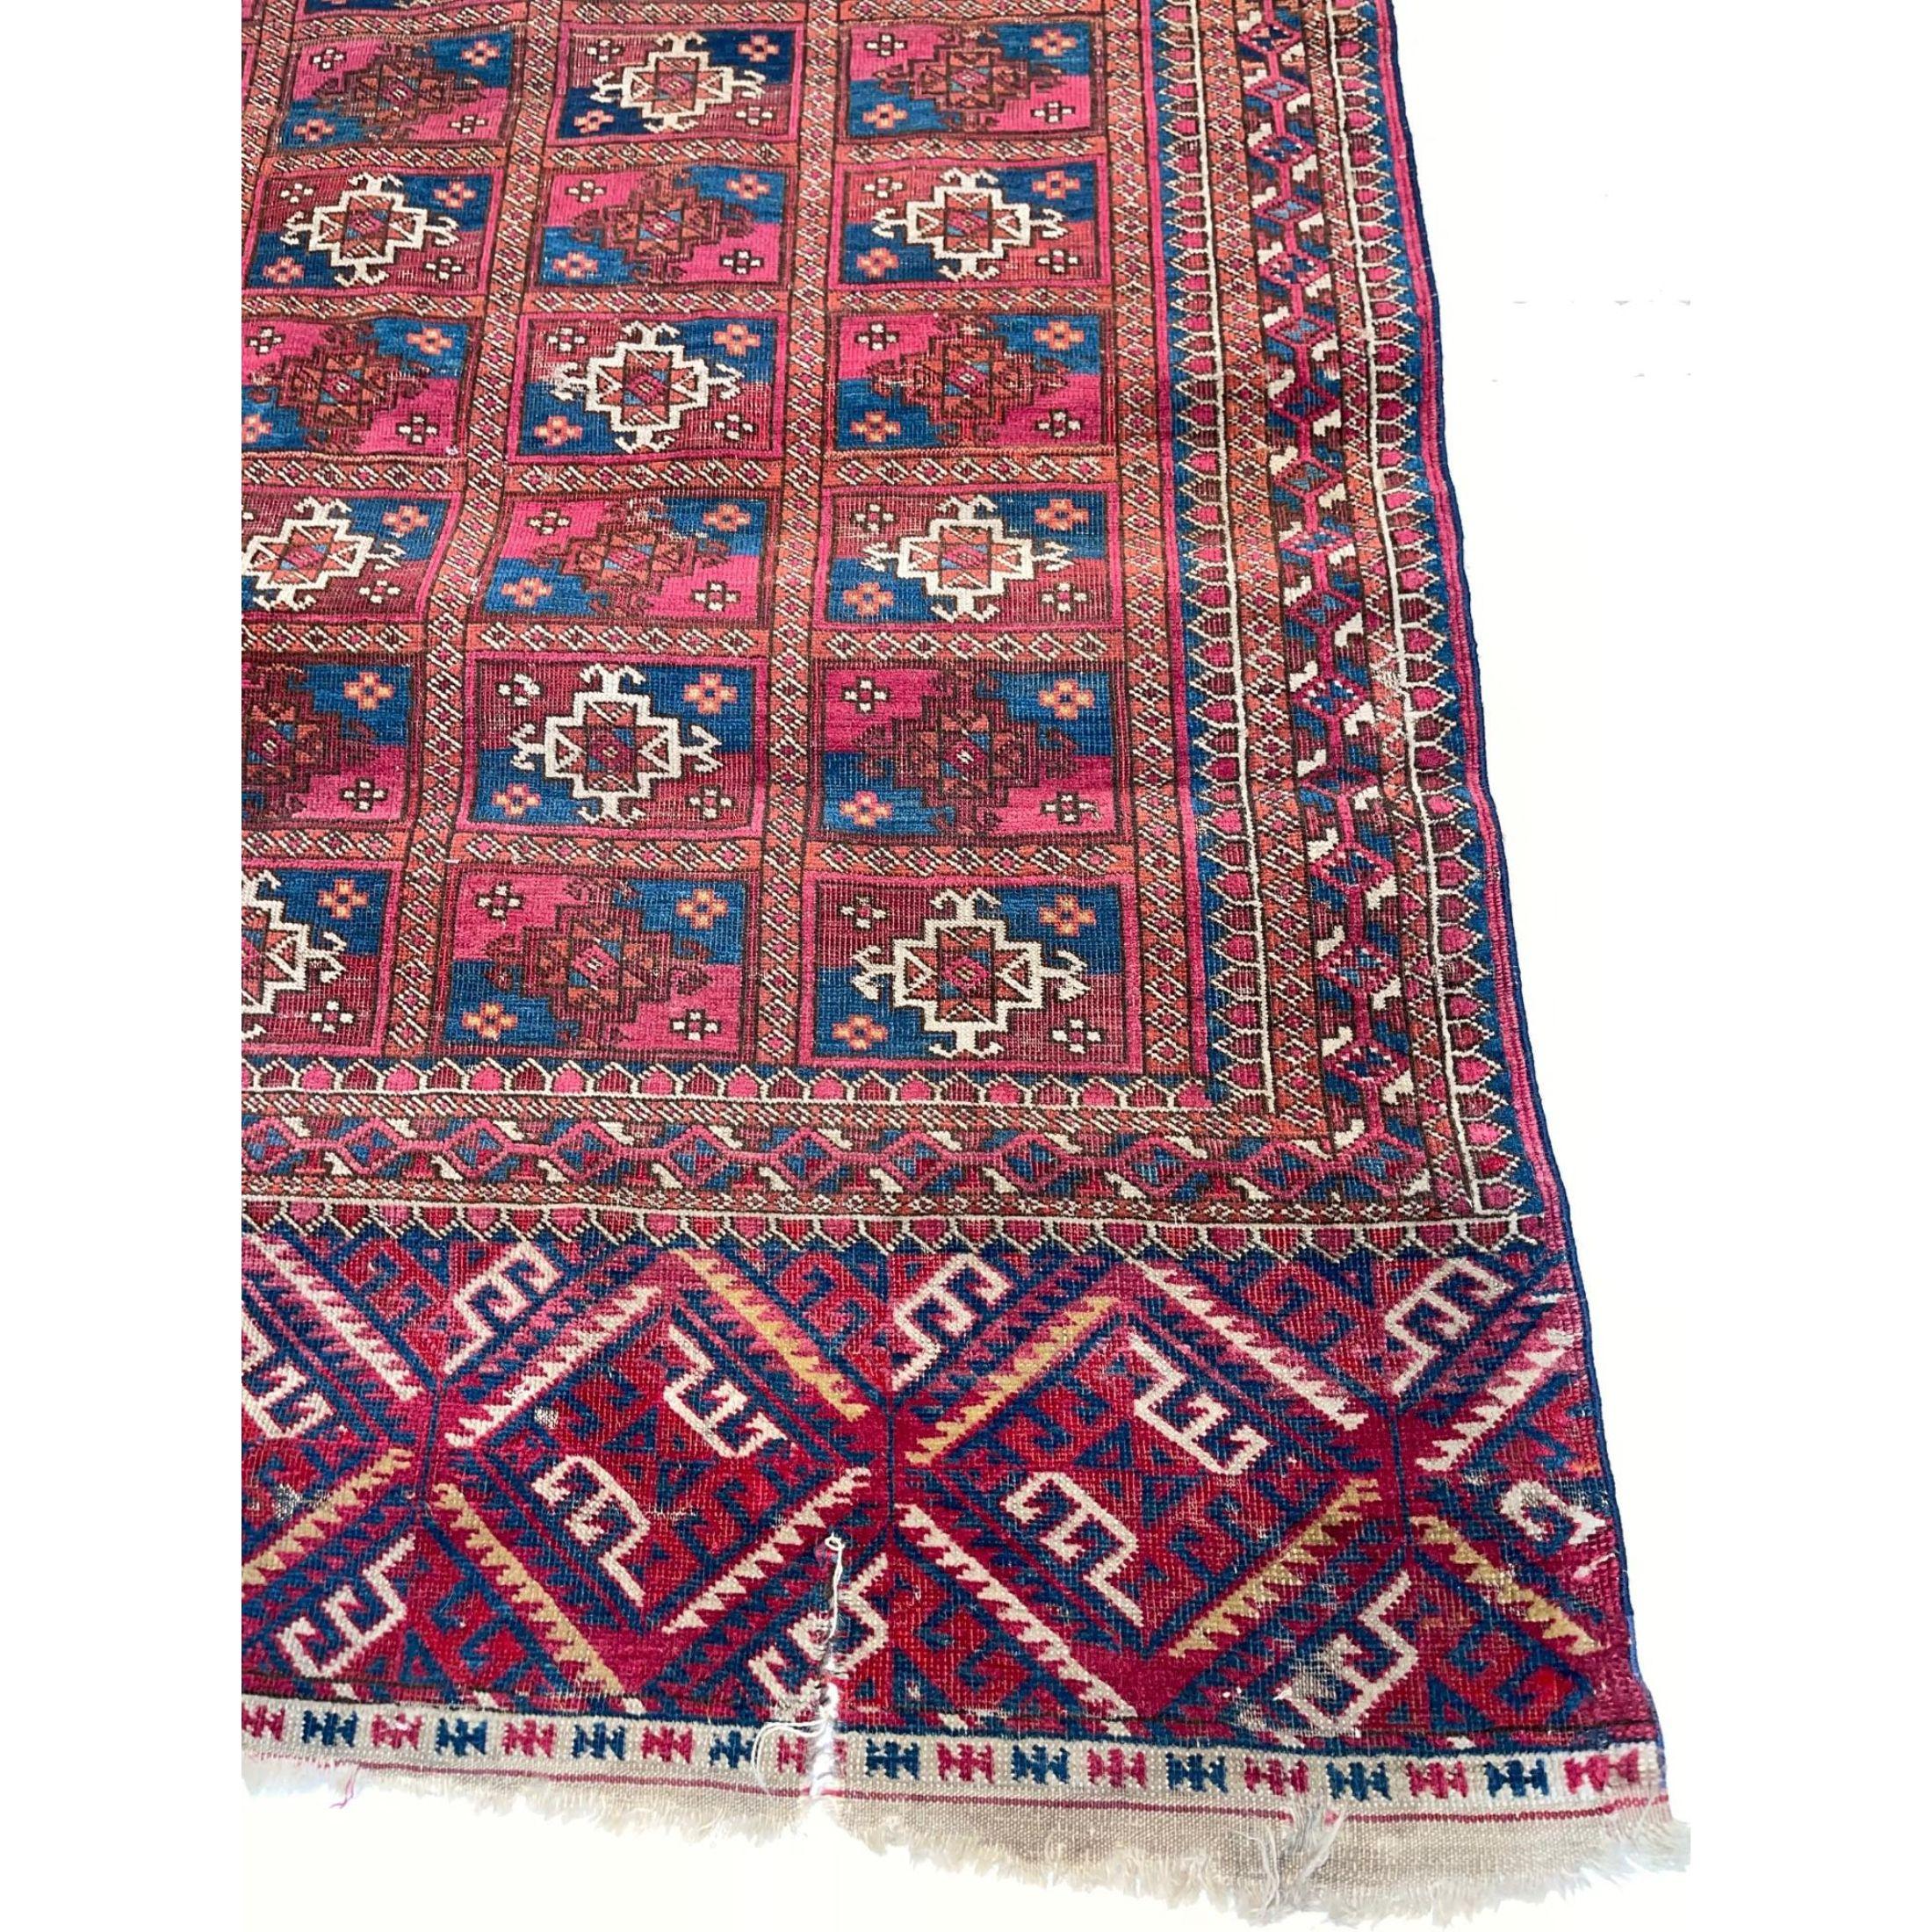 Baluch Rugs – Antique Baluch rugs are a unique phenomenon in the world of antique Oriental rugs. Rather than originating from one specific, easily identified region, Baluch rugs are actually expressive of an extraordinarily wide range of styles.